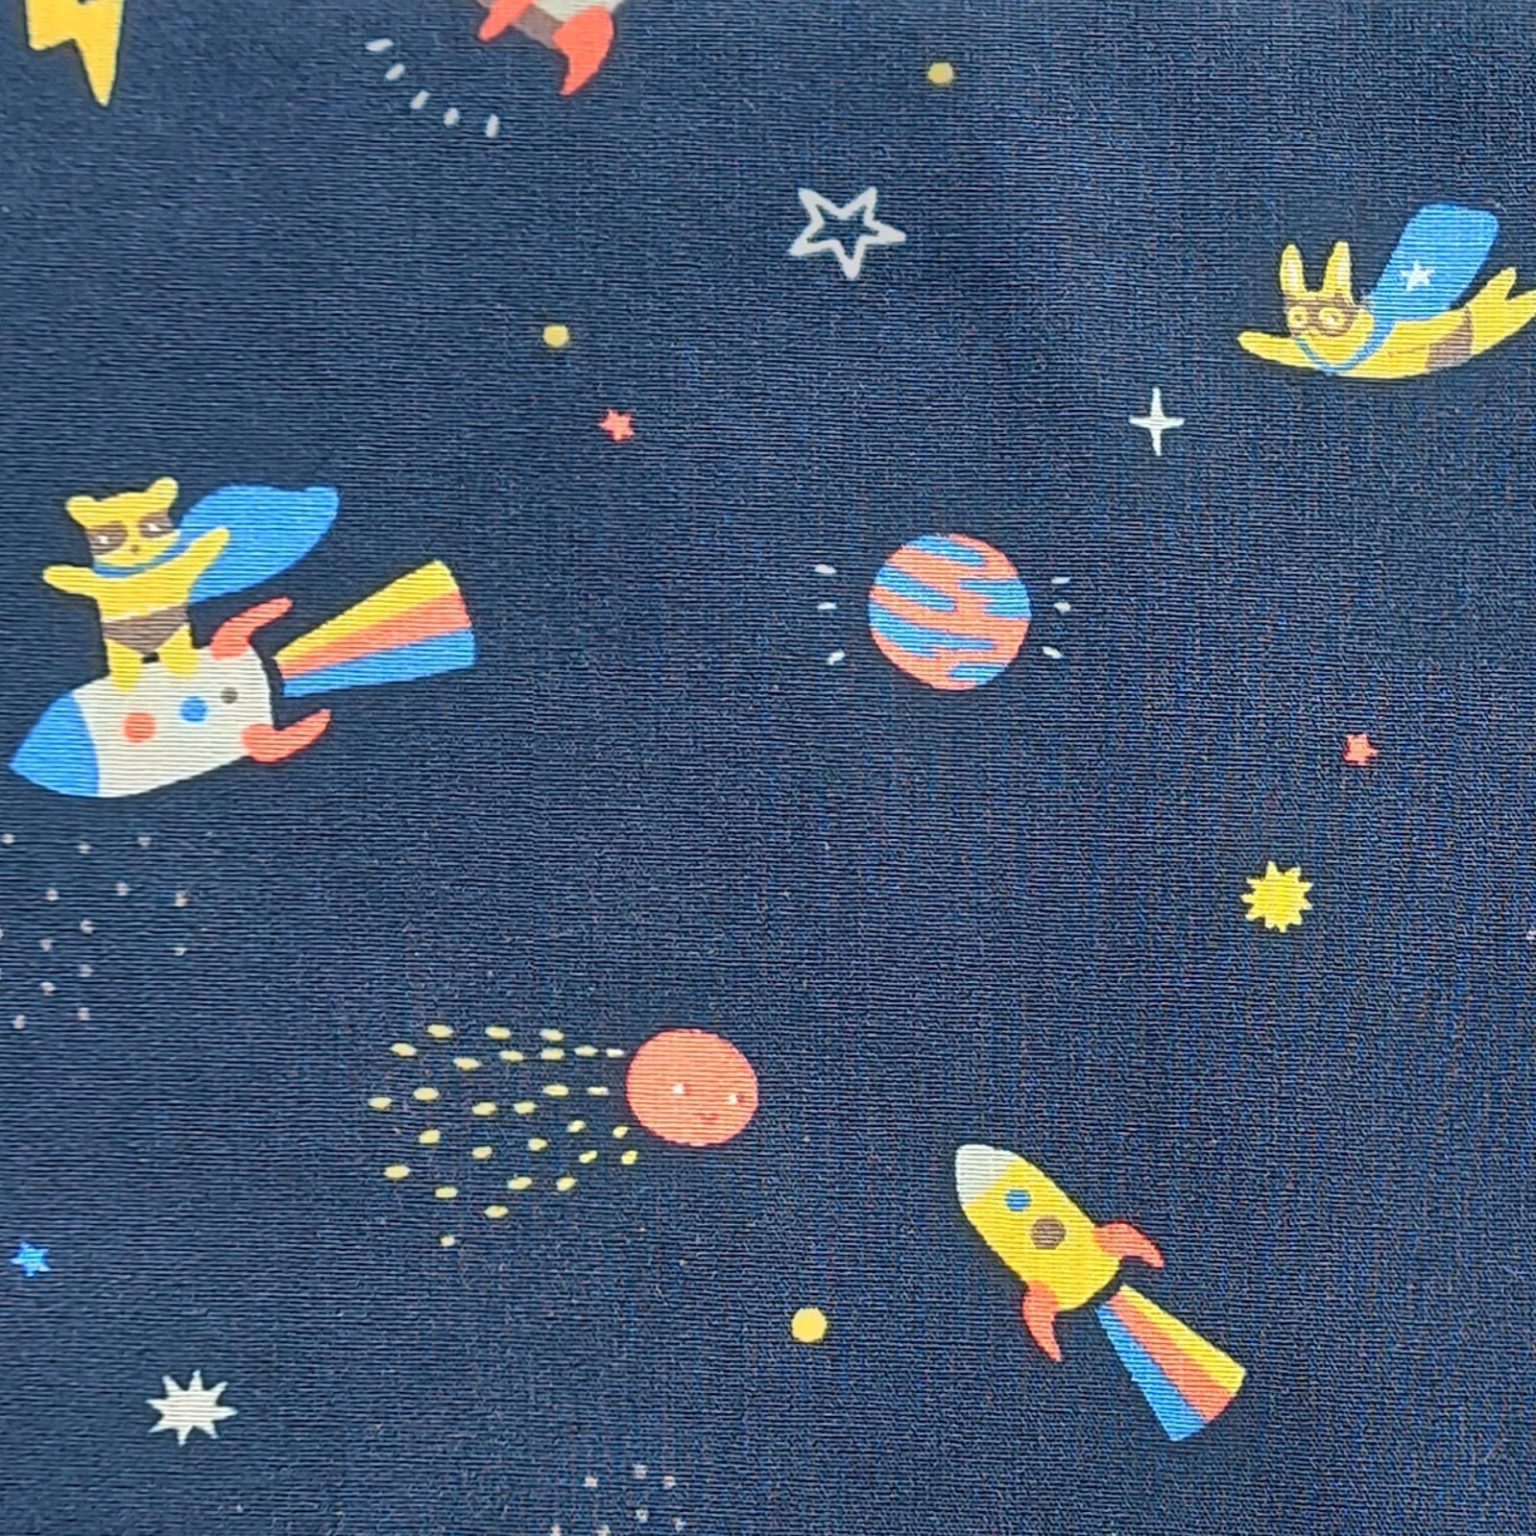 navy cotton poplin fabric space pattern at More Sewing